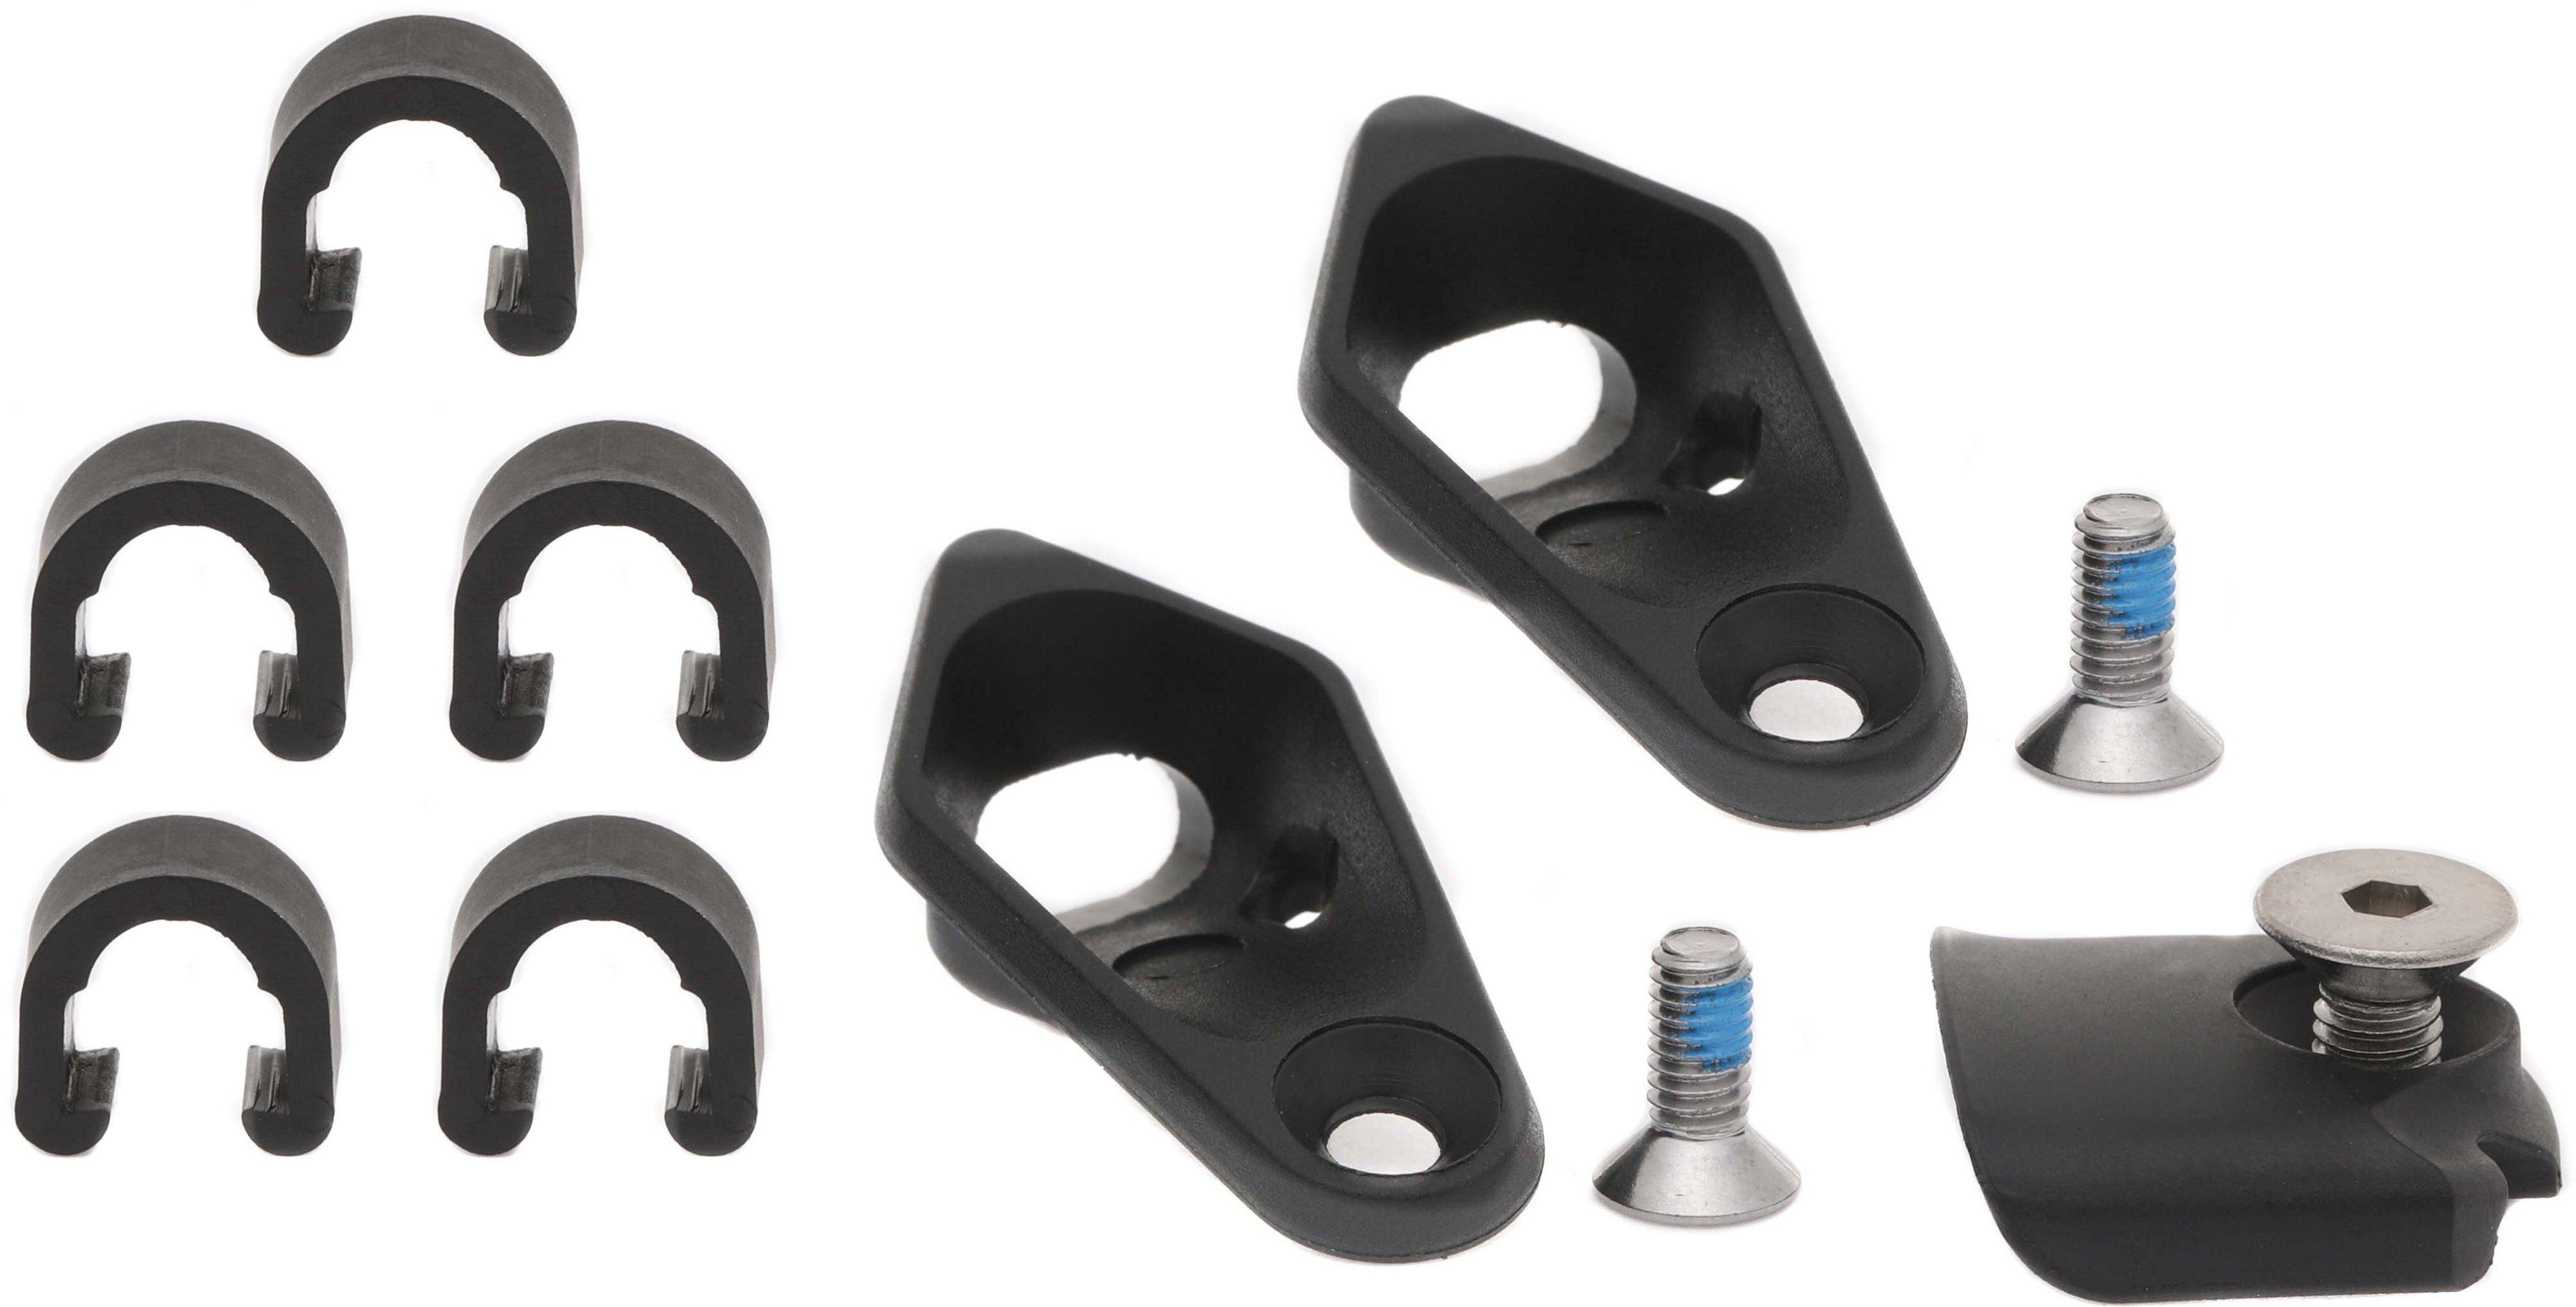 Nukeproof Reactor Alloy Cable Guide Kit - Black